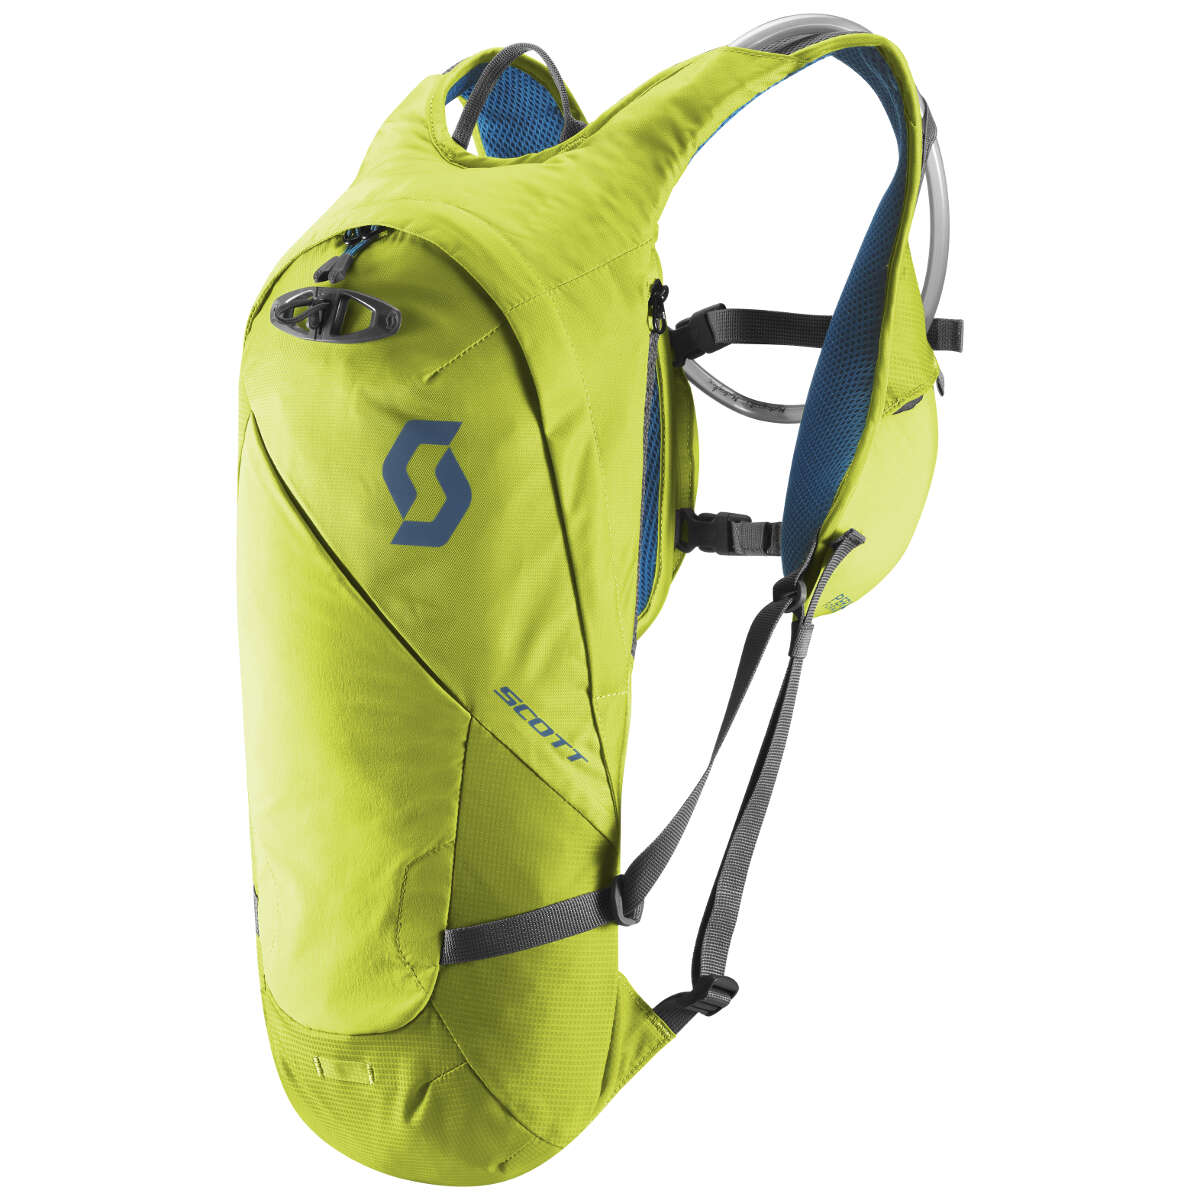 Scott Backpack with Hydration System Compartment, 6 Liter Perform HY 6 Sulphur Yellow/Seaport Blue